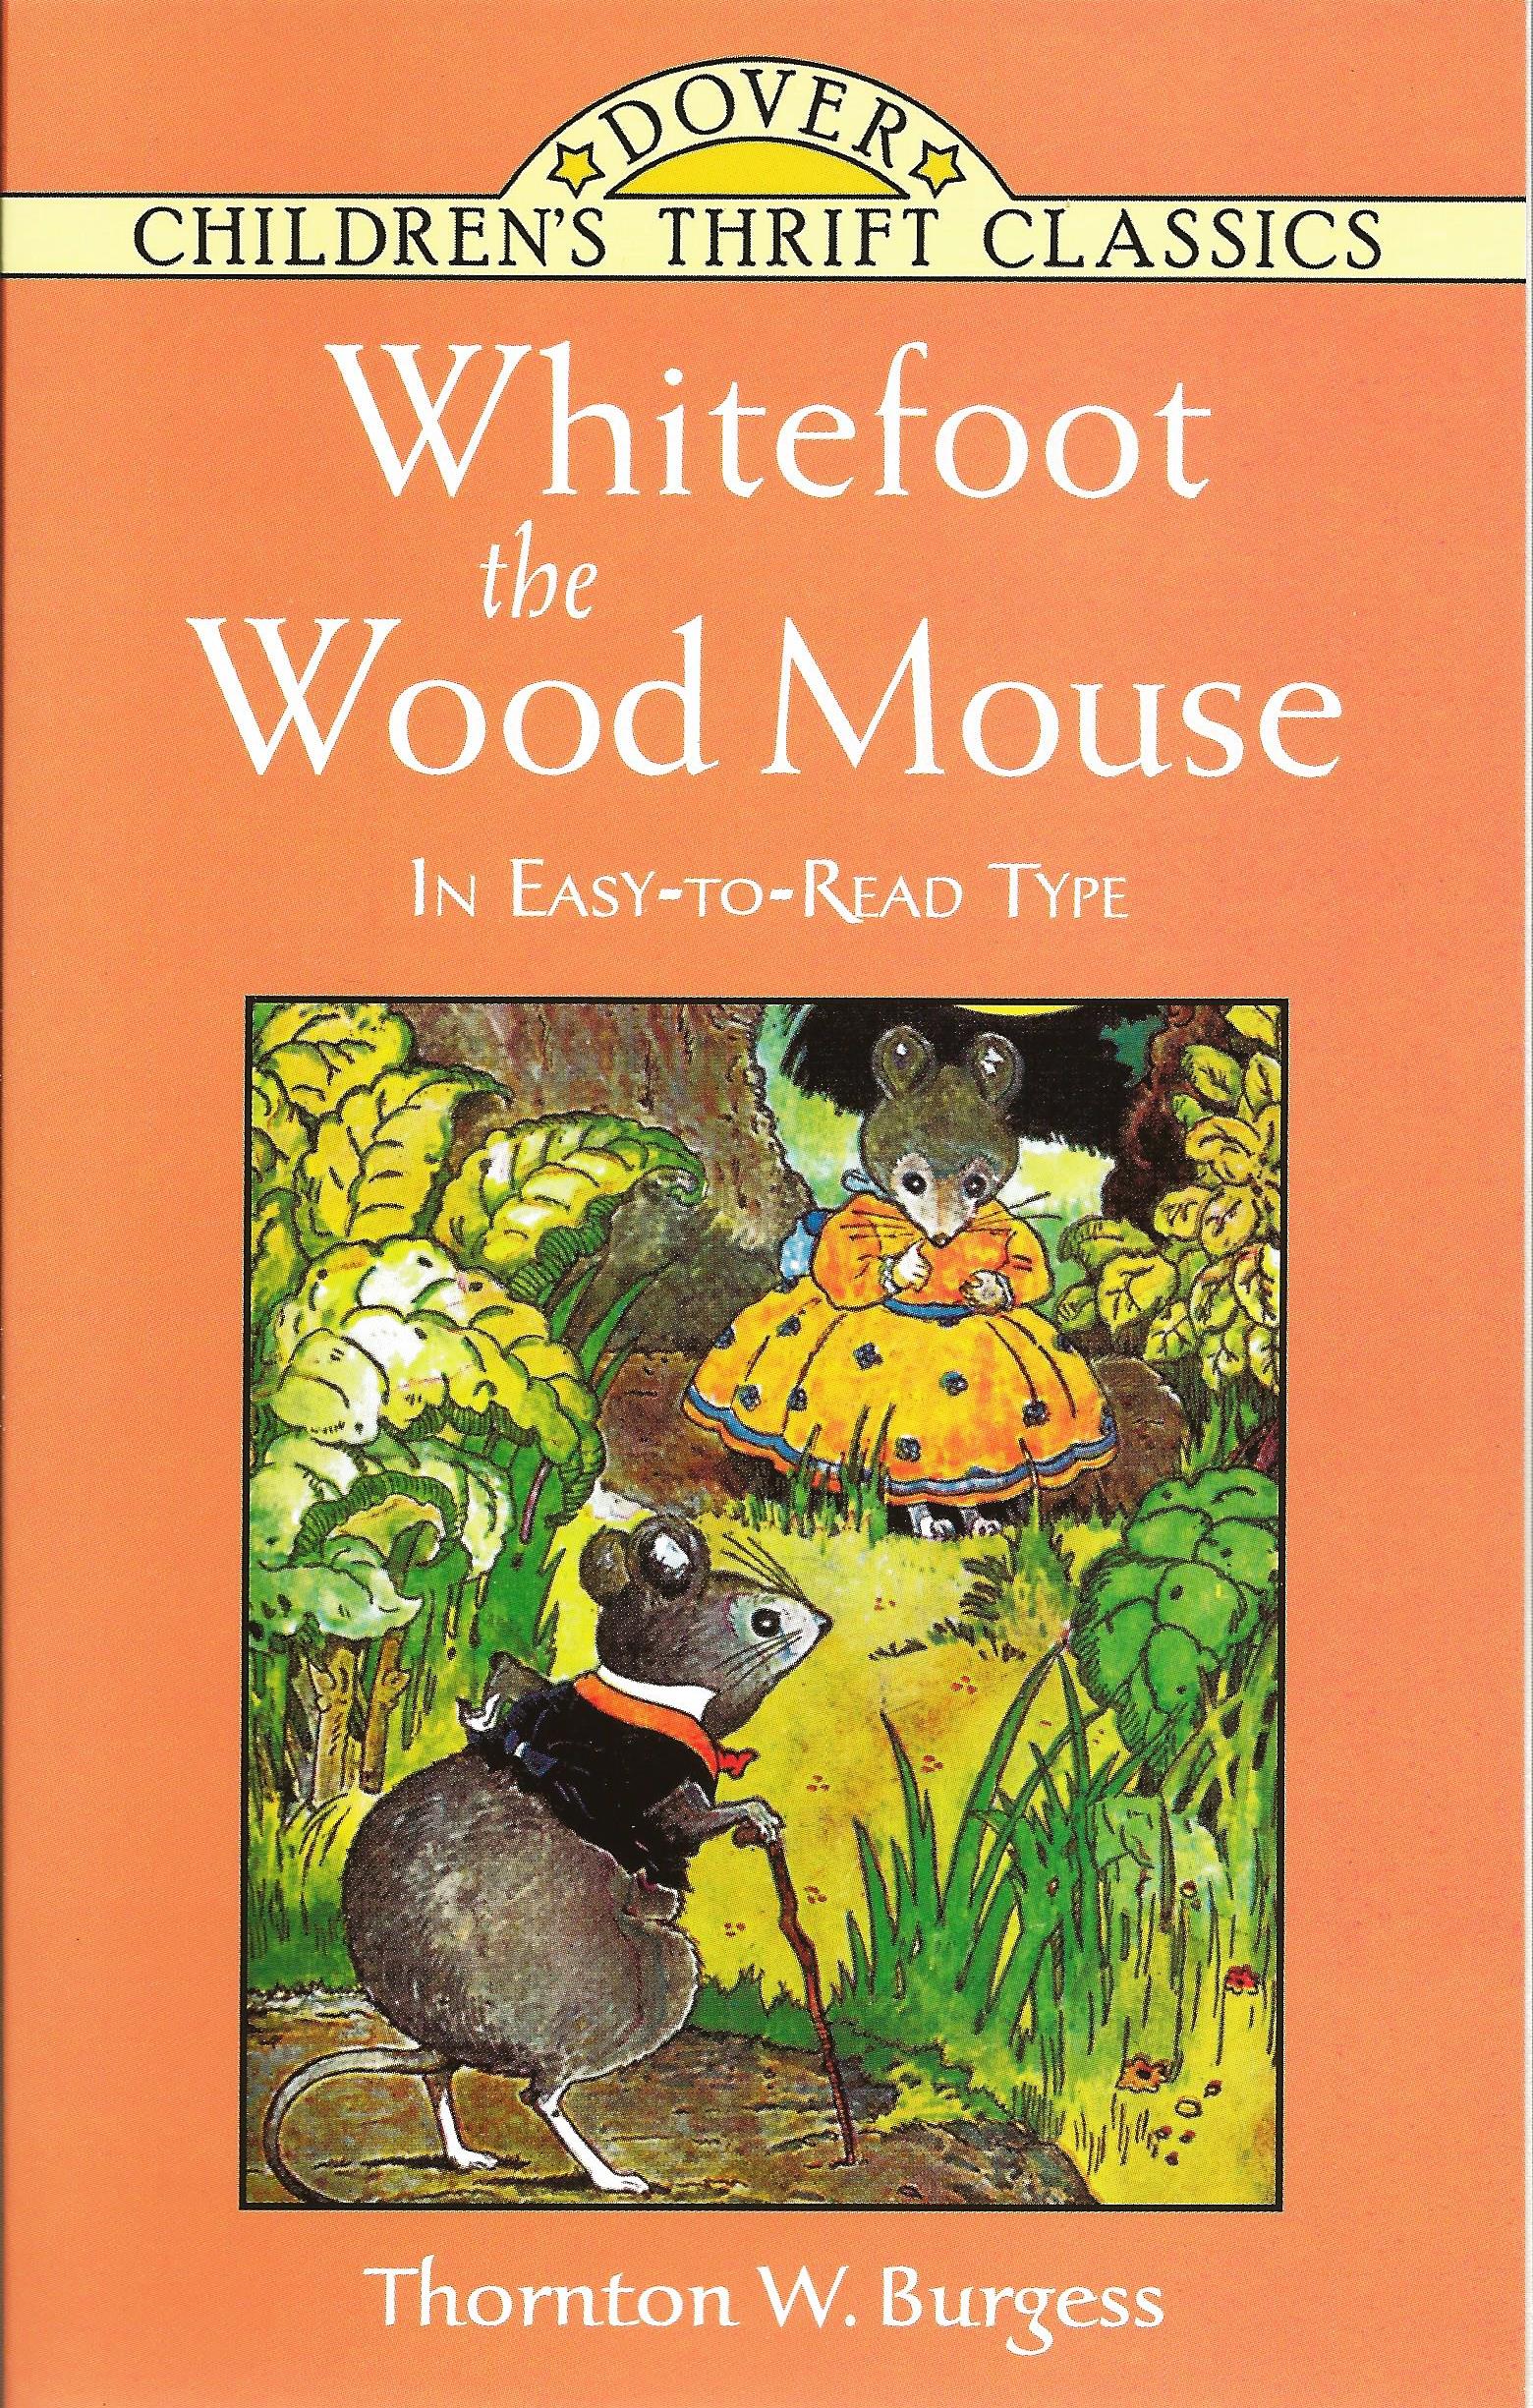 THE ADVENTURES OF WHITEFOOT THE WOOD MOUSE